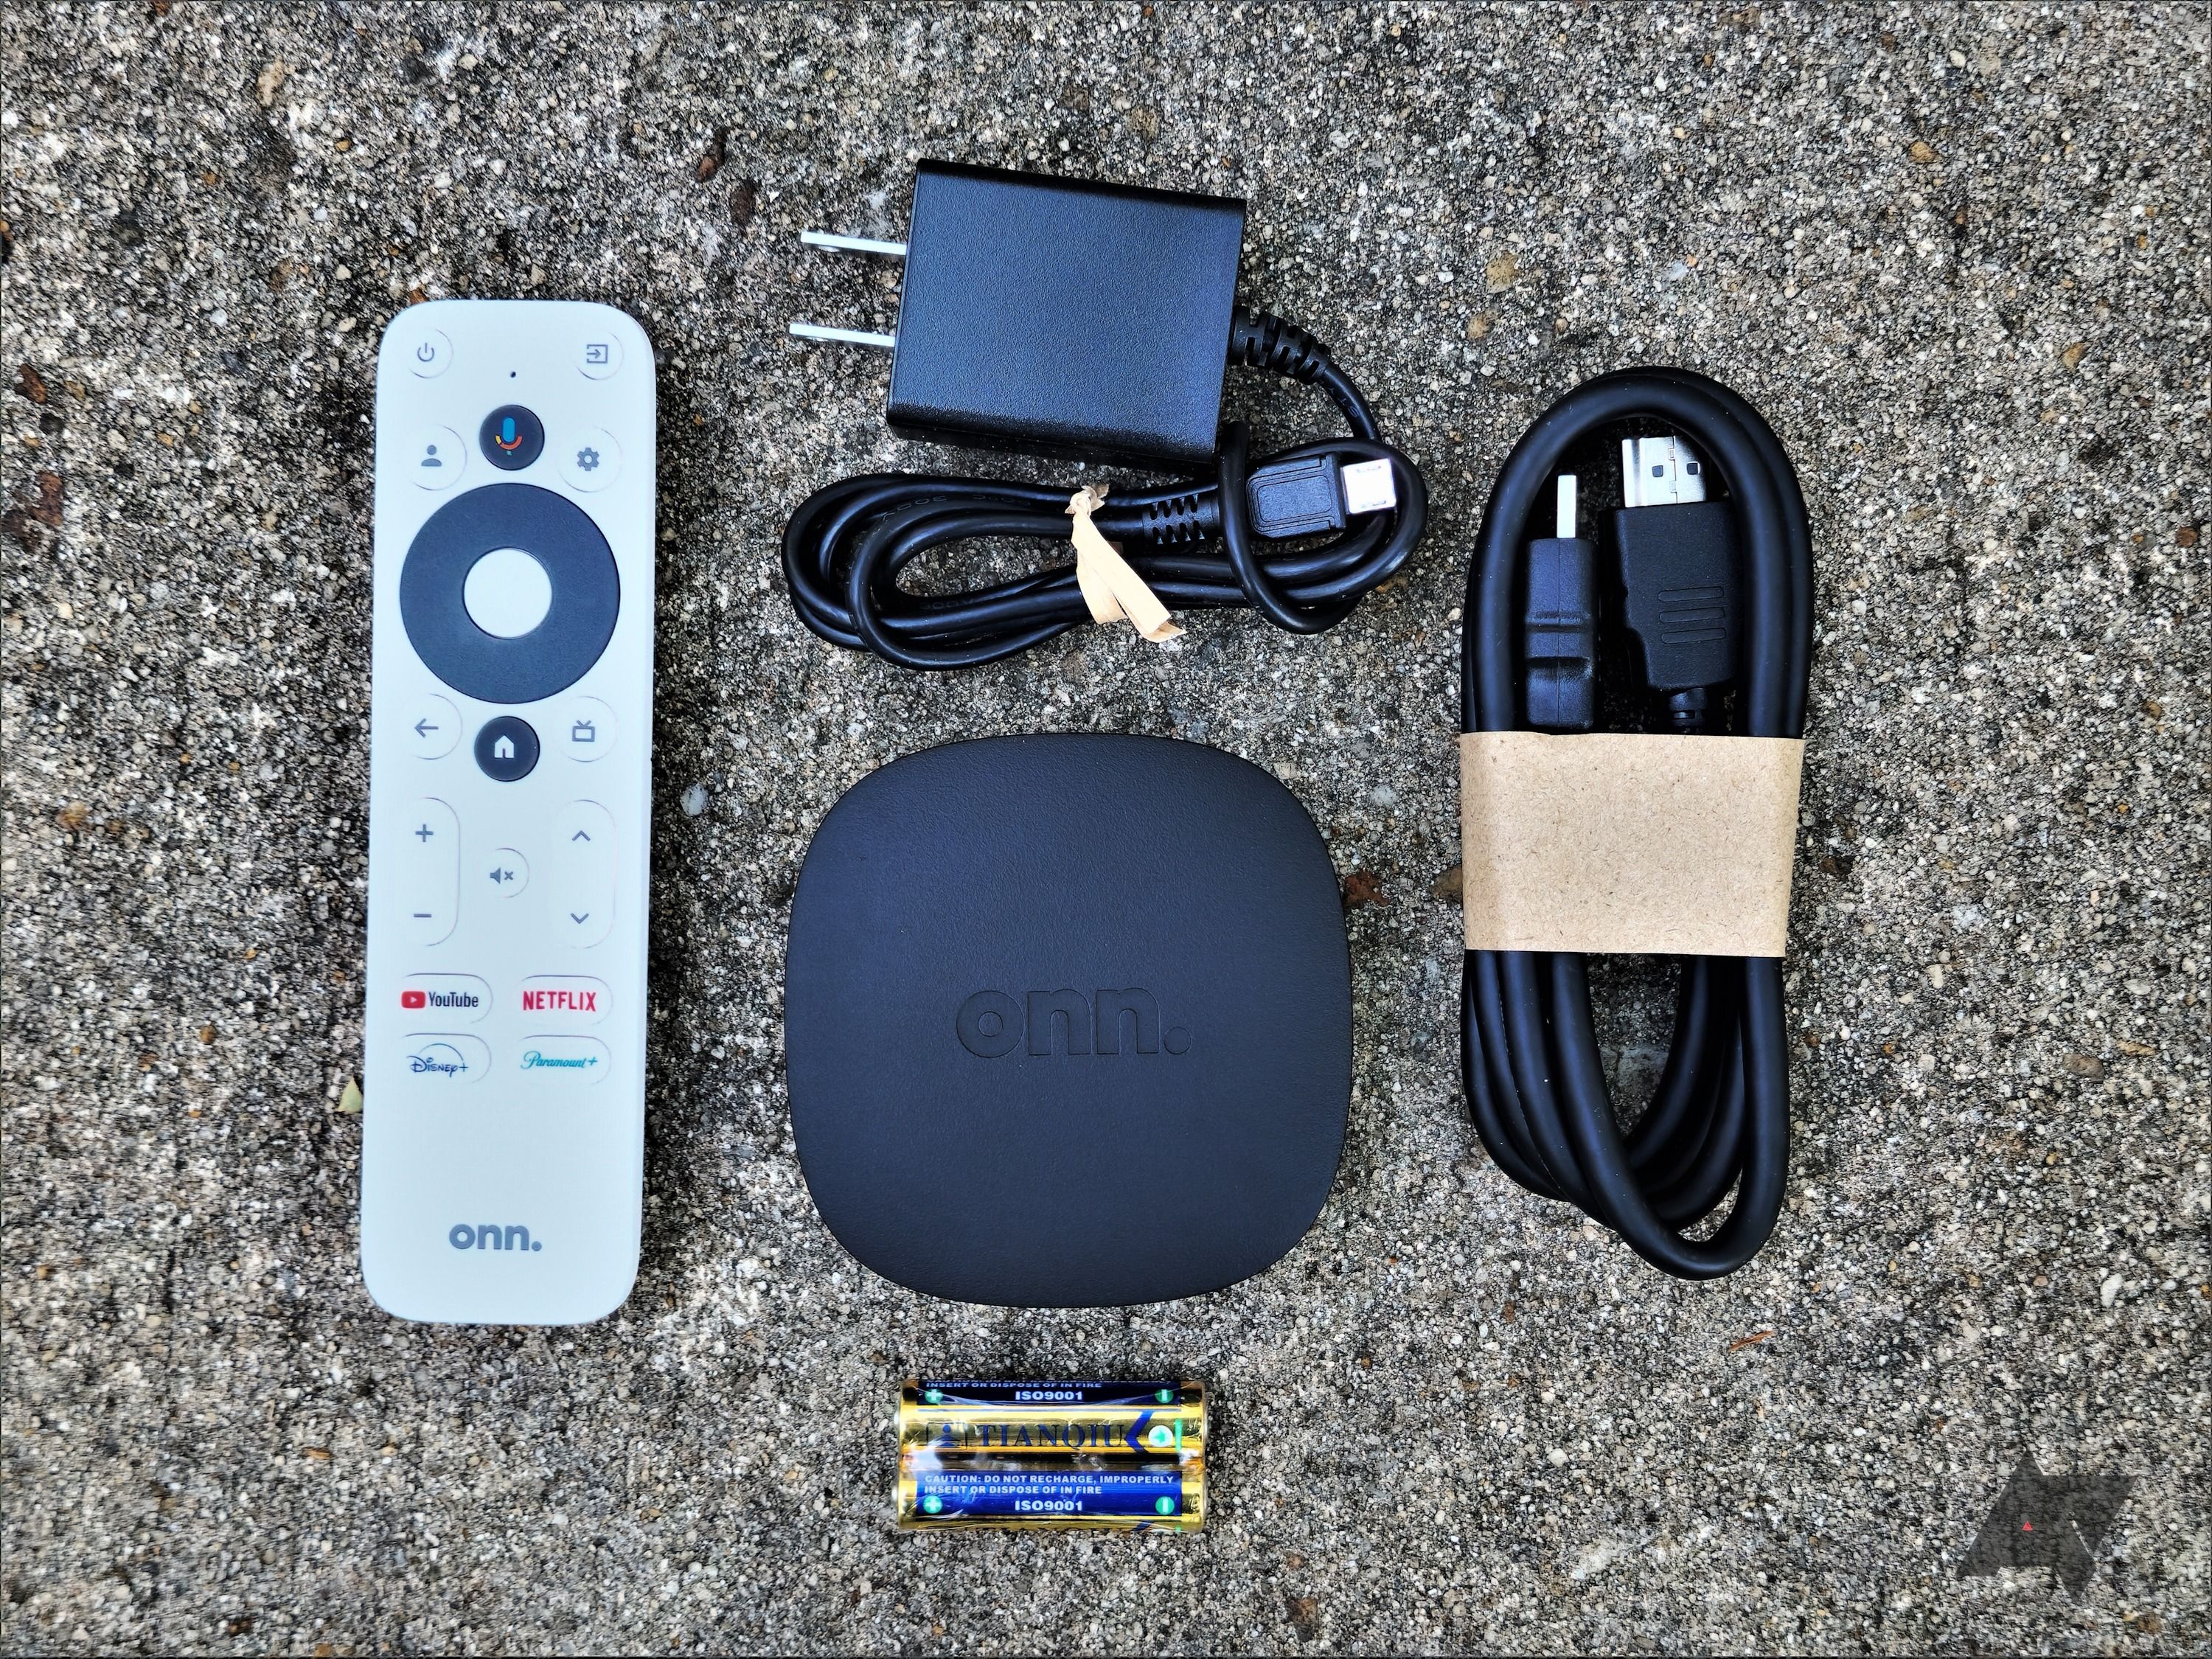 Onn Google TV 4K Streaming Box: For $20, you can't go wrong